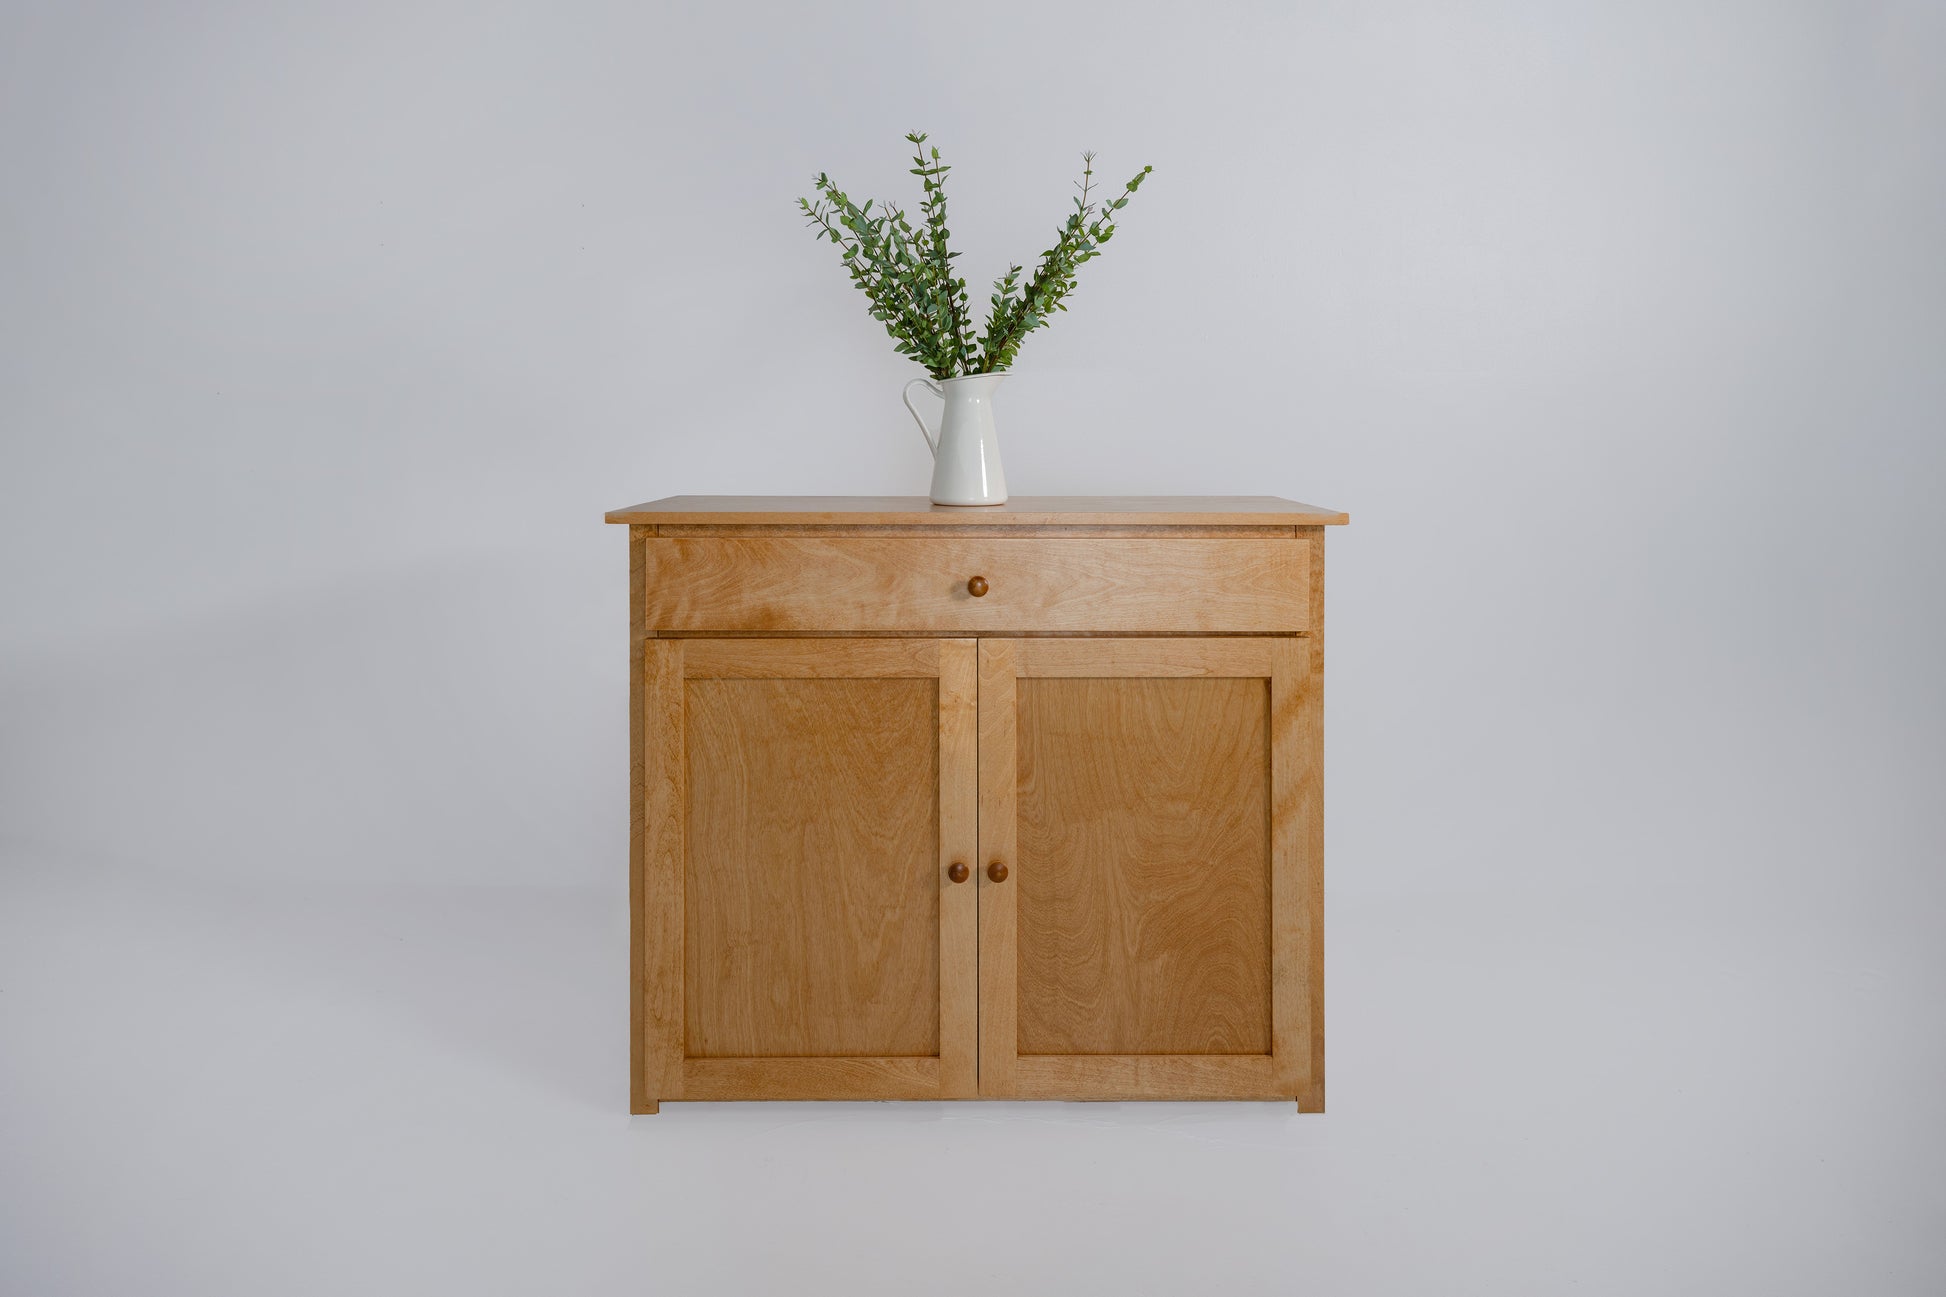 Berkshire Shaker Cabinet with Drawers features adjustable shelving and birch construction. Shown in Golden Oak Finish.